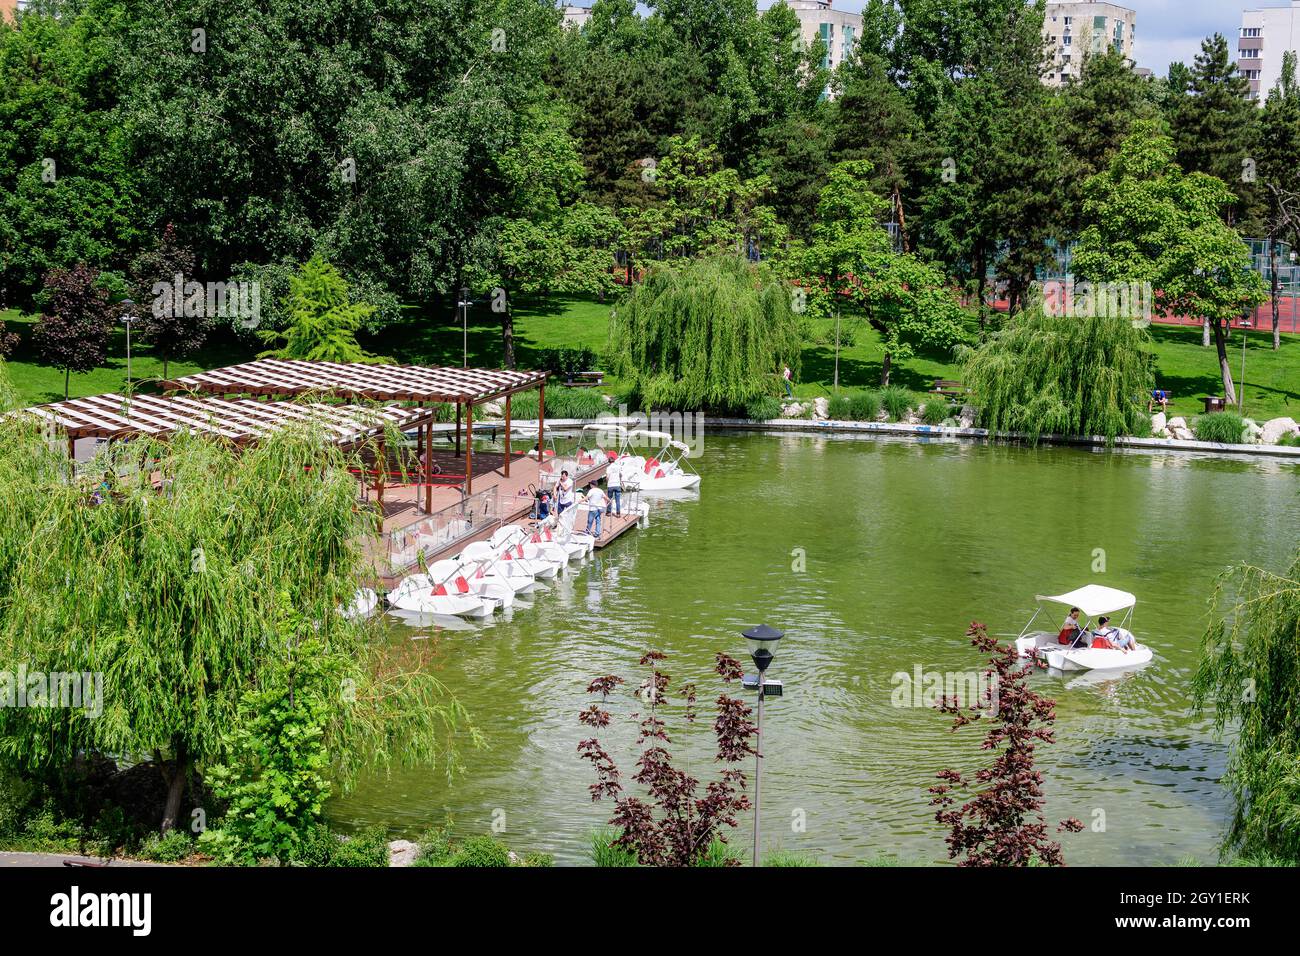 Bucharest, Romania - 29 May 2021: Landscape with lake and vivid green trees in Drumul Taberei Park (Parcul Drumul Taberei) also known as Moghioros Par Stock Photo